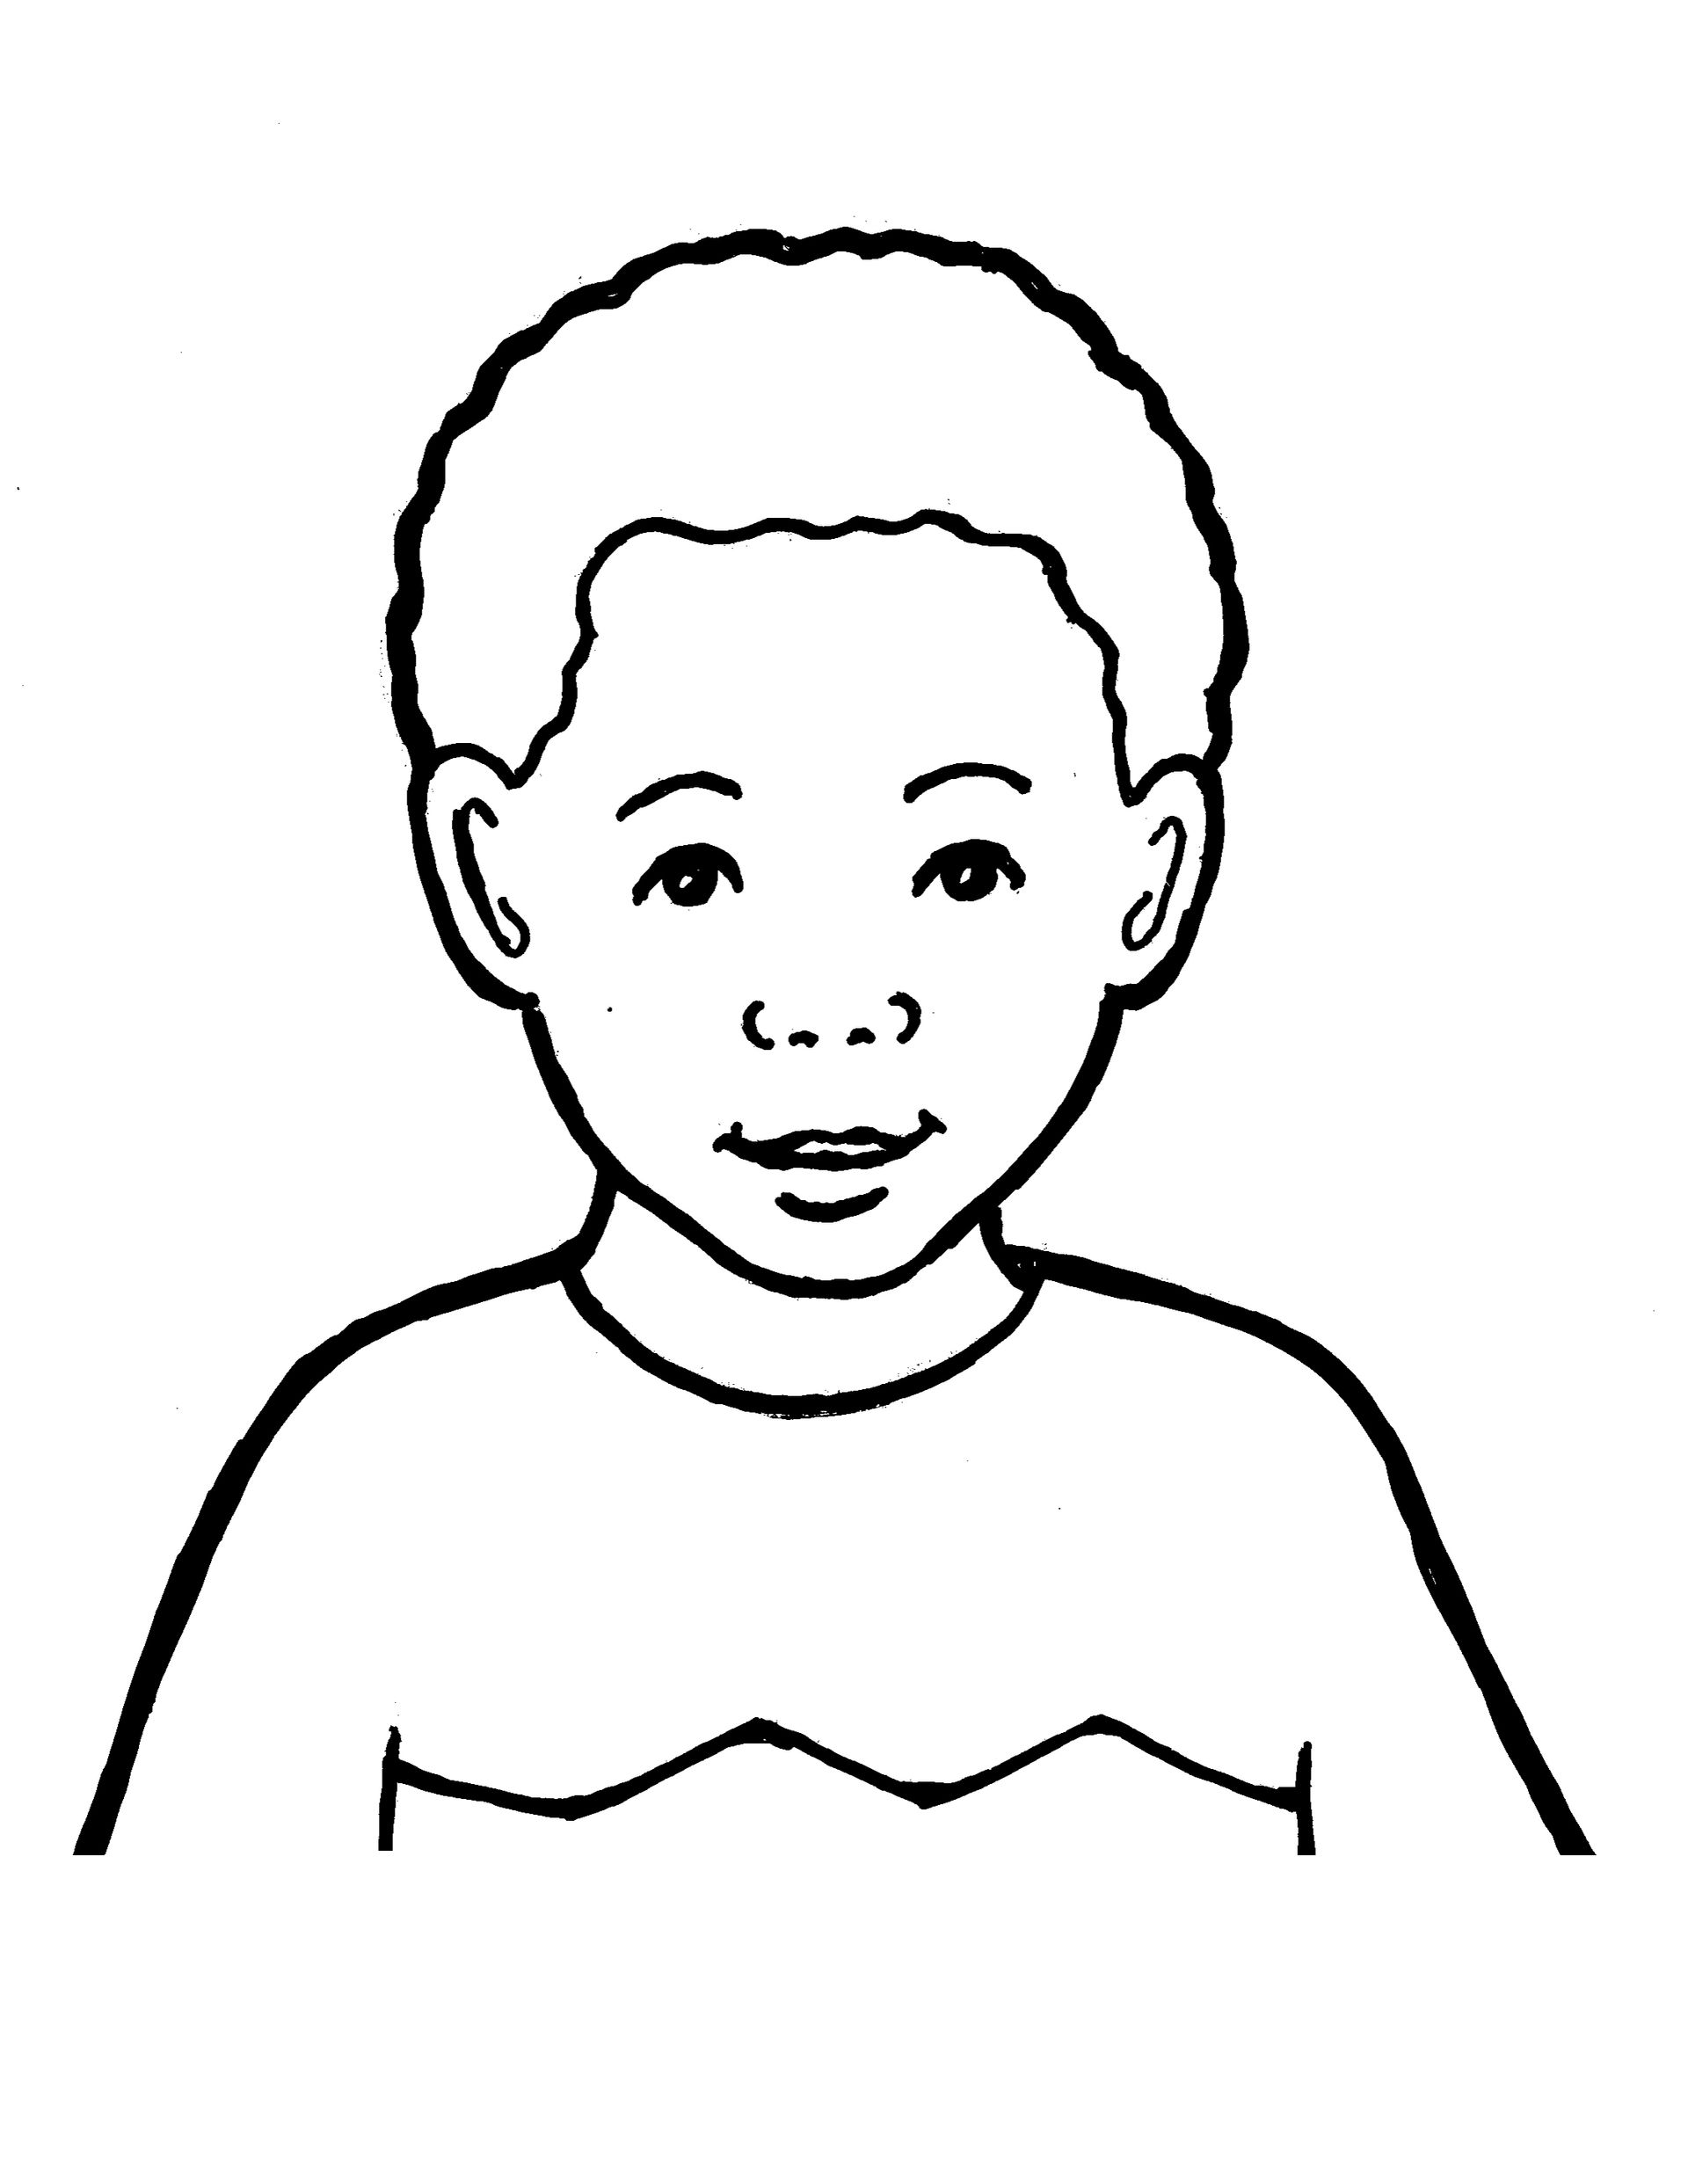 A line drawing of a Primary boy wearing a shirt with a zigzag pattern.